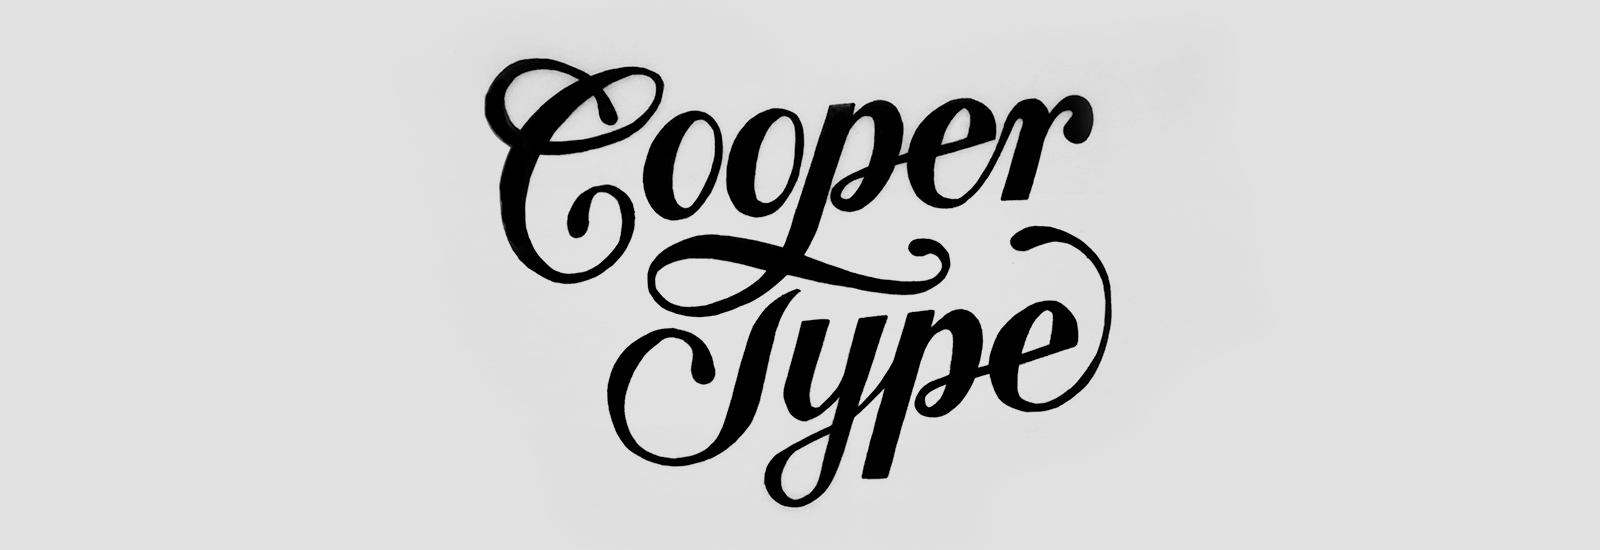 cooper-term1-drawnletters5